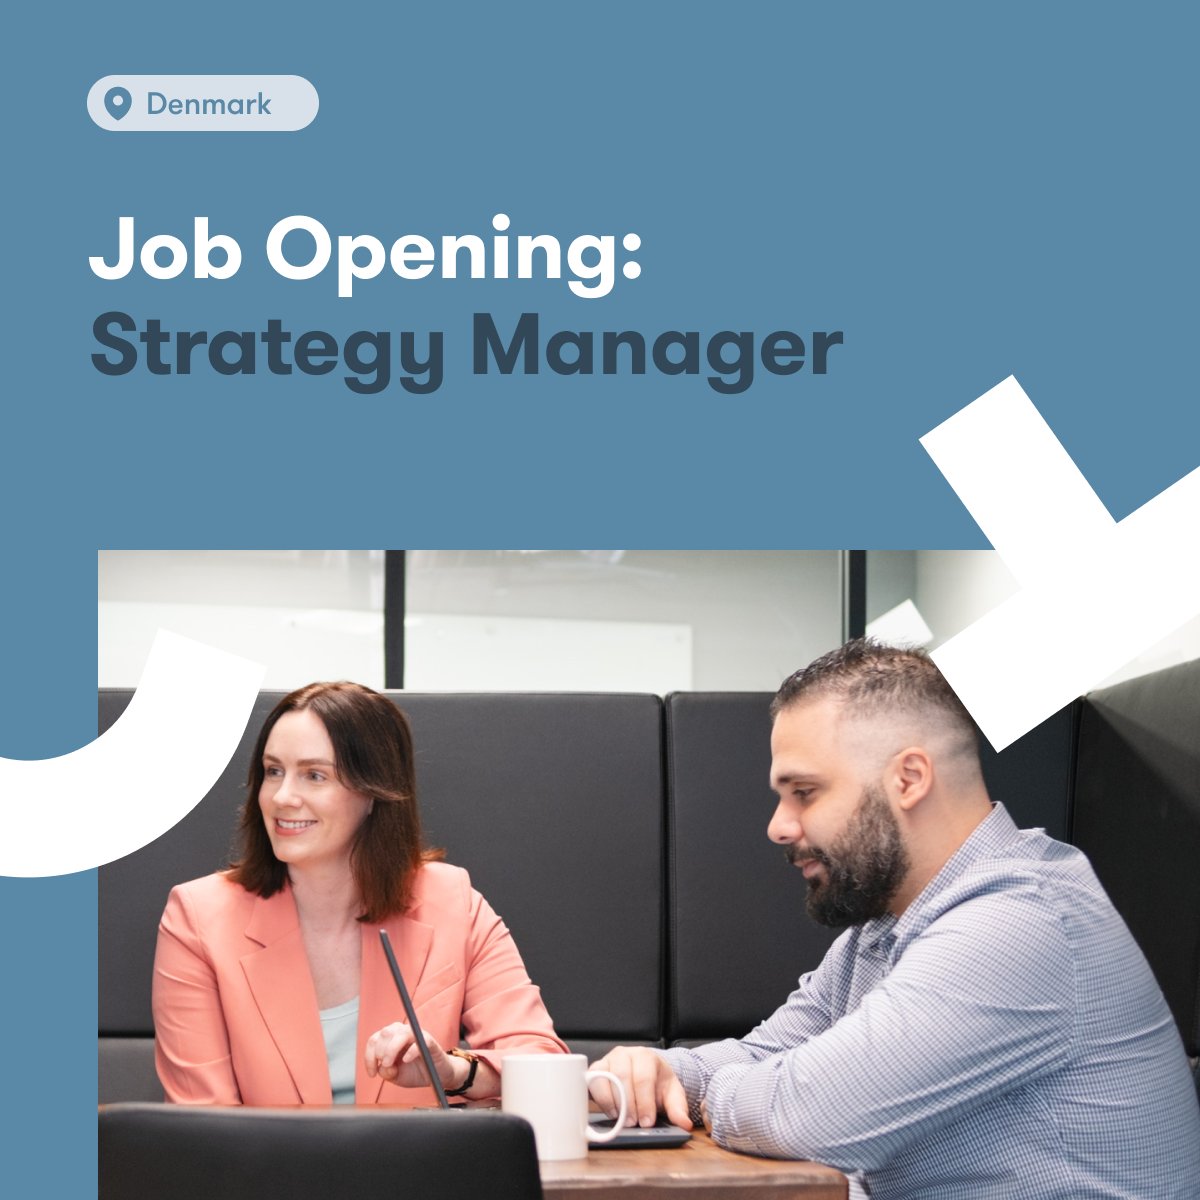 Is the integration of data analysis into strategic planning something that engages your professional curiosity? Join our team as a Strategy Manager and unleash your potential. Apply now: careers.trackunit.com/jobs/4466263-s…

#dataanalysis #job #hiring #jobposting #strategicplanning